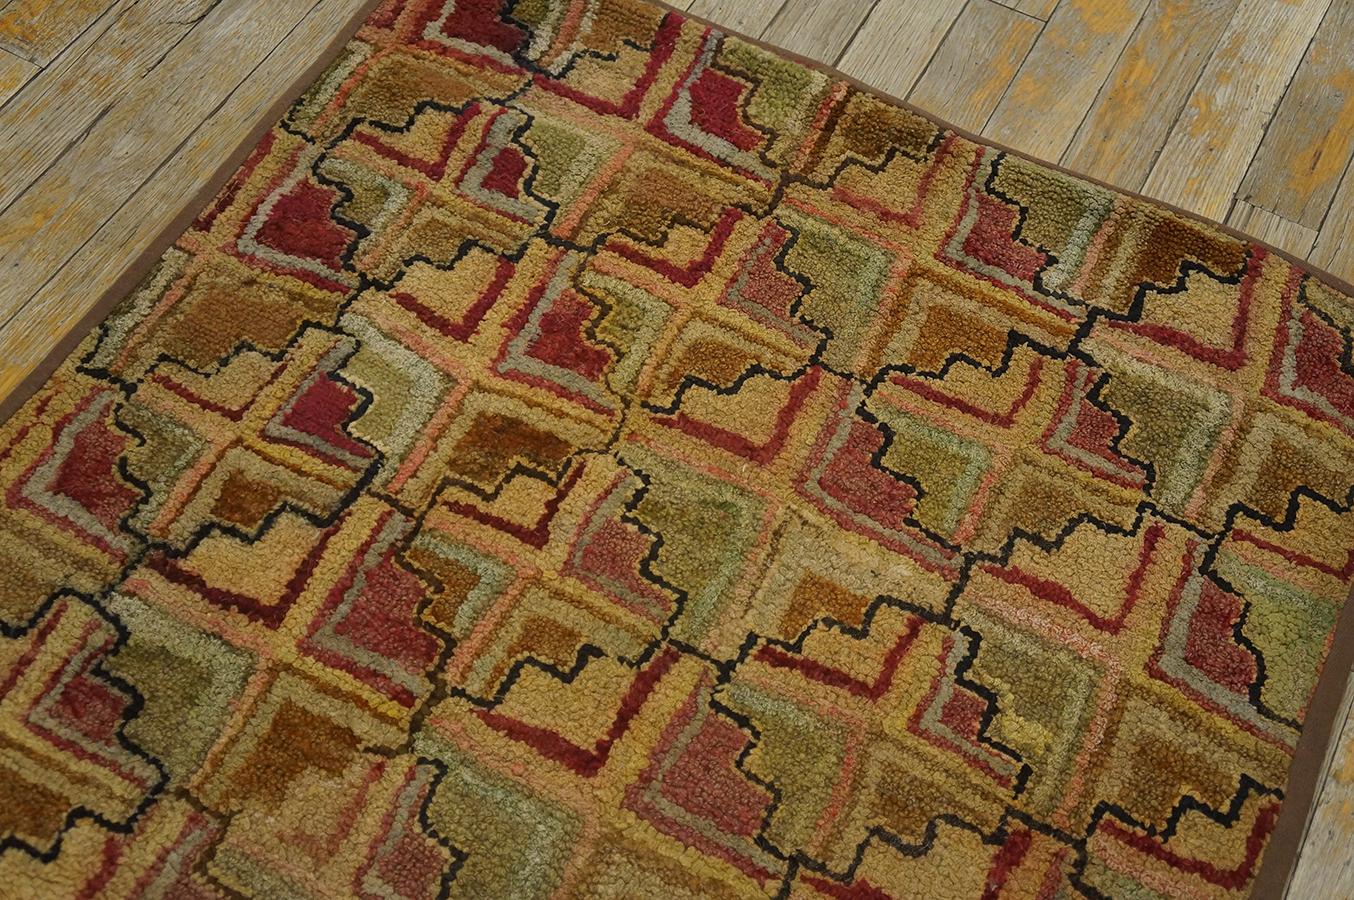 Early 20th Century American Hooked Rug  (2' 7'' x 5' - 78 x 152 cm ) For Sale 6